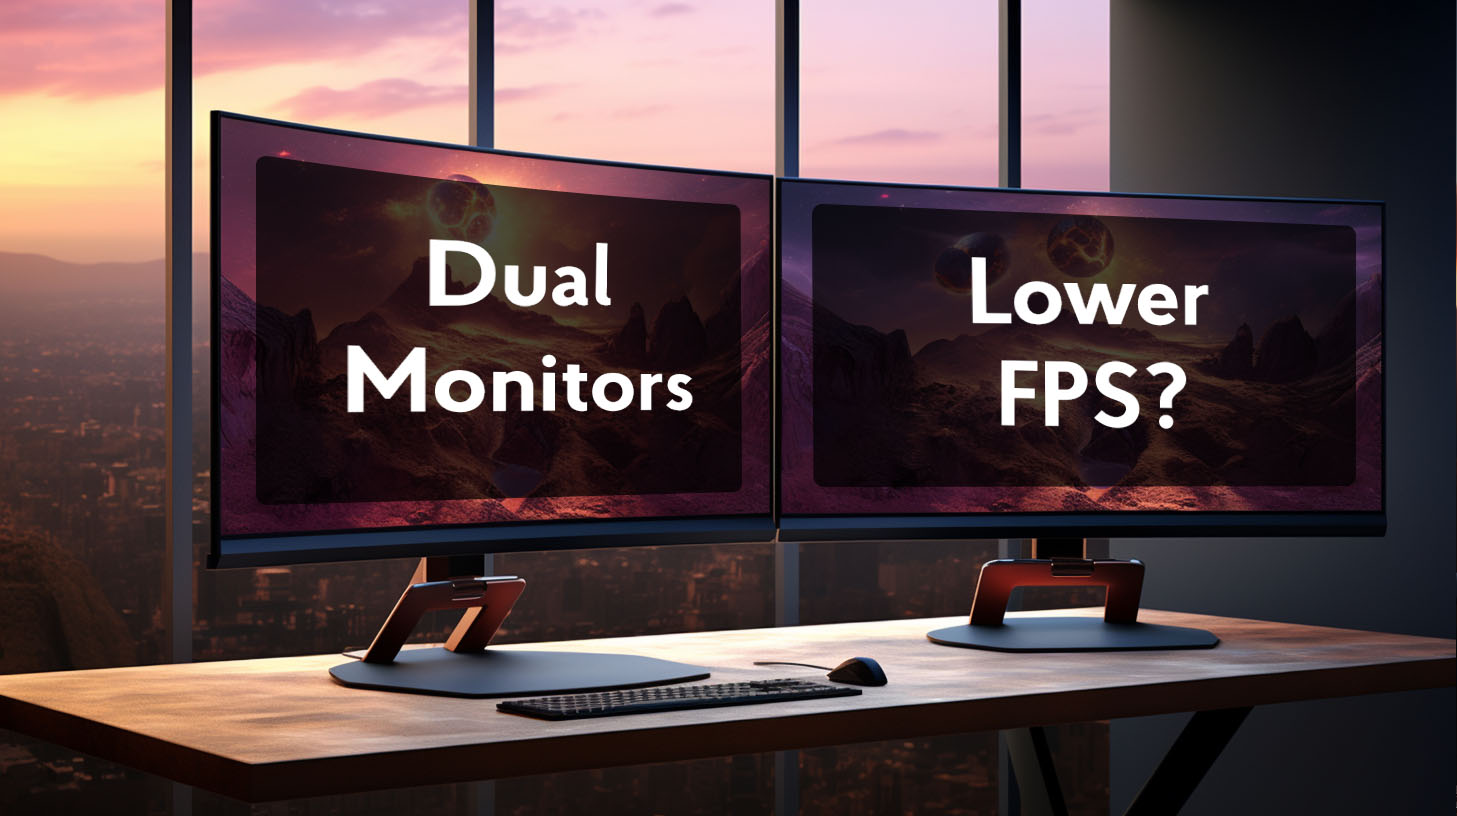 Does Dual Monitors Lower FPS?